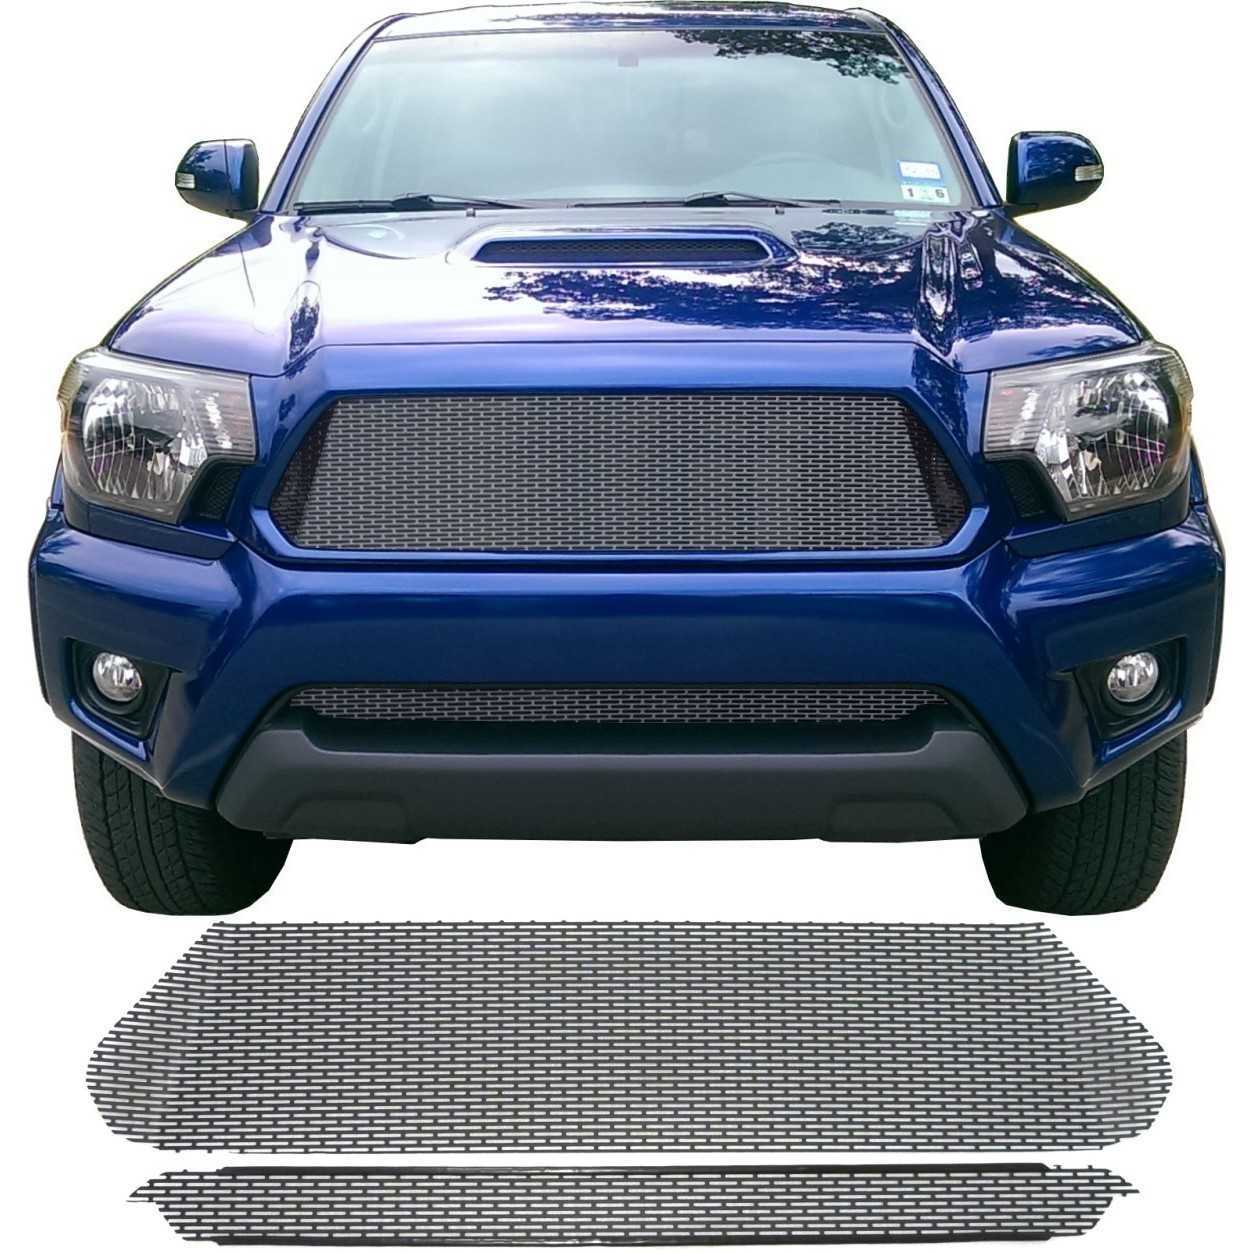 2012 - 2015 Toyota Tacoma Grill Mesh Builder